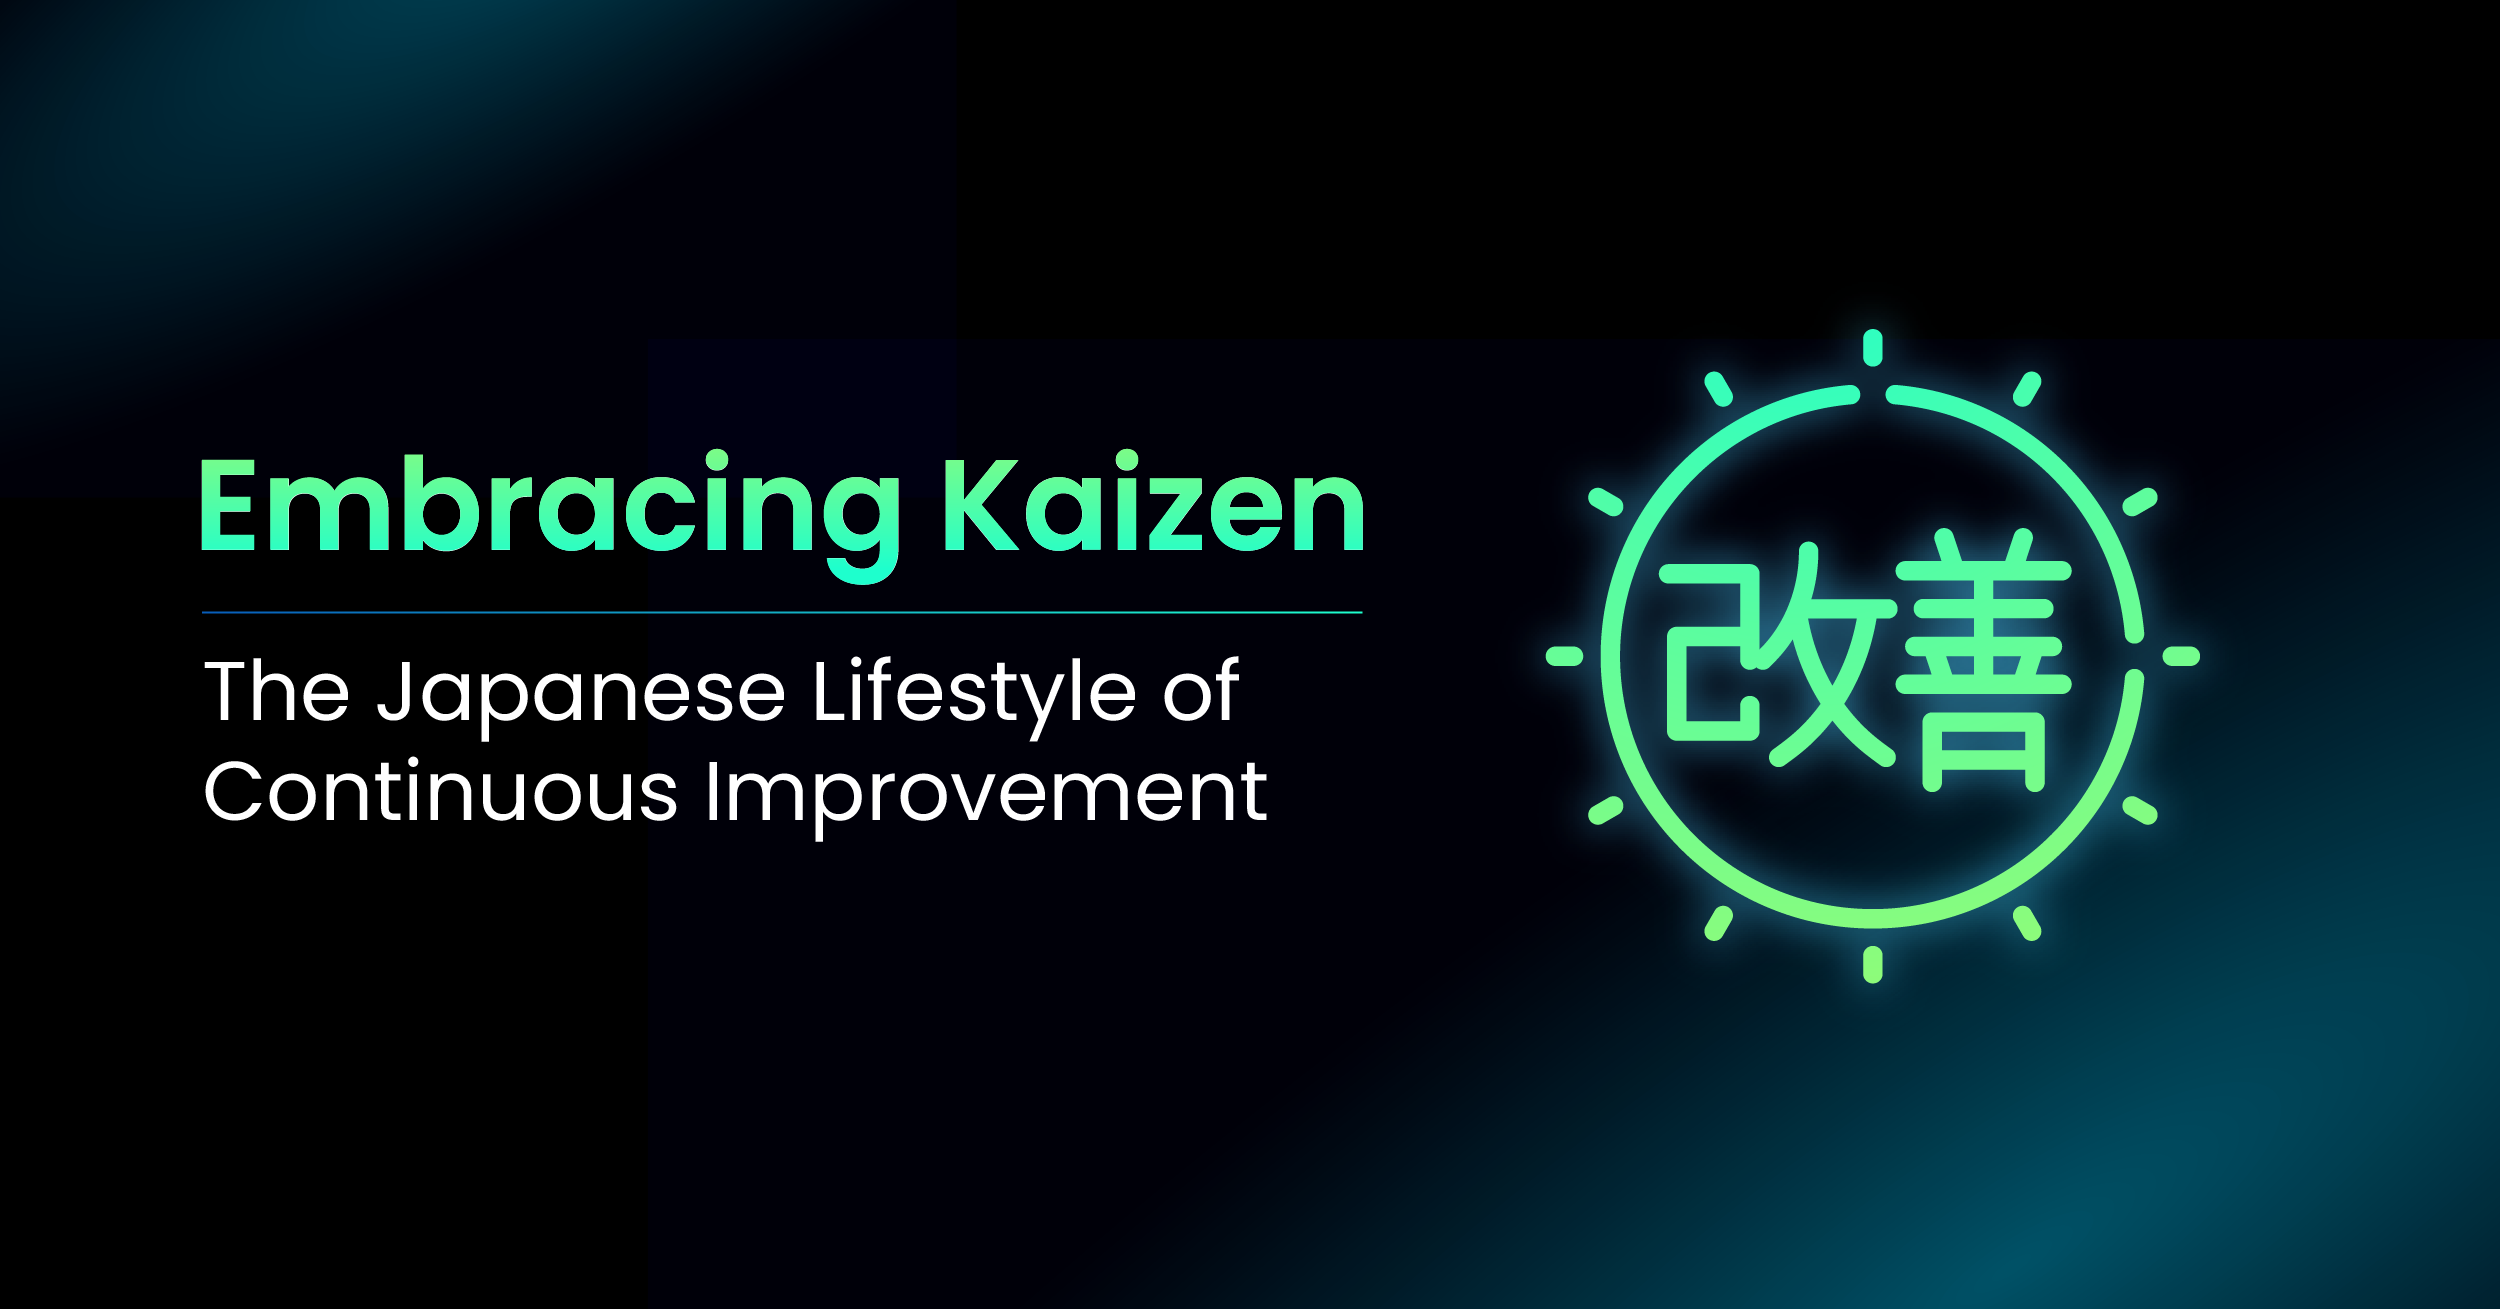 Embracing Kaizen: The Japanese Lifestyle of Continuous Improvement